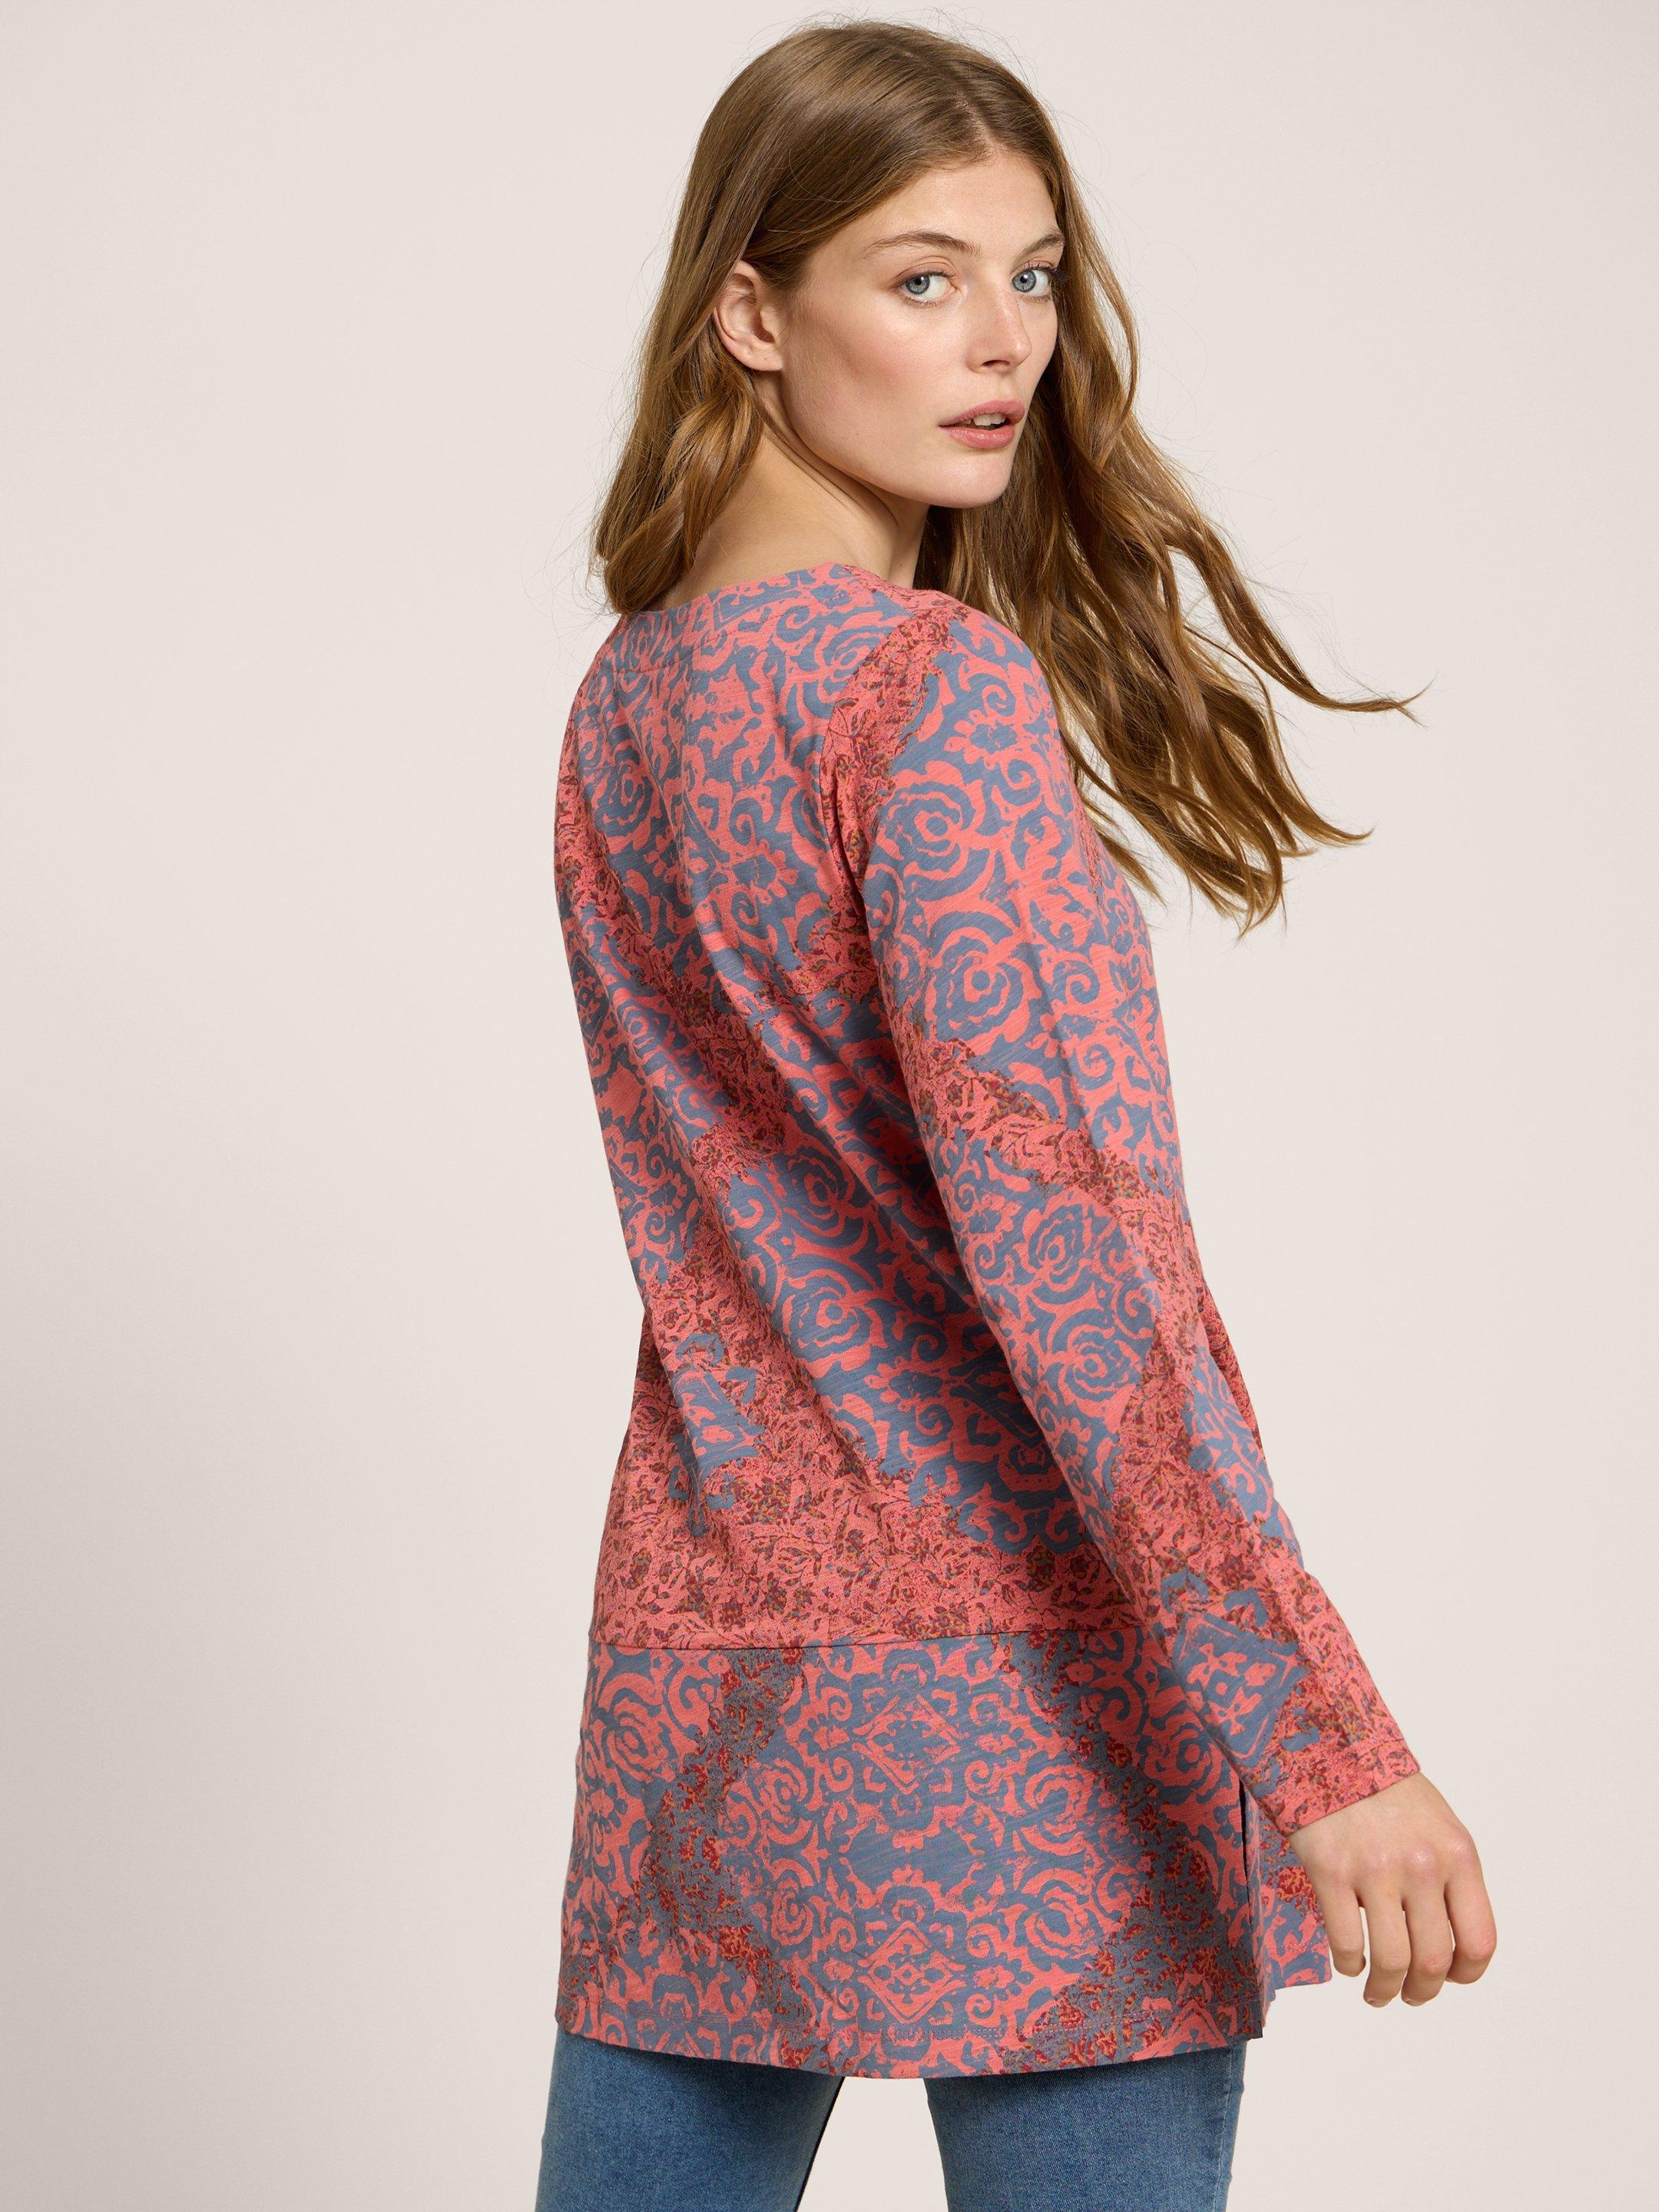 CARRIE LS TUNIC in RED PR - MODEL BACK